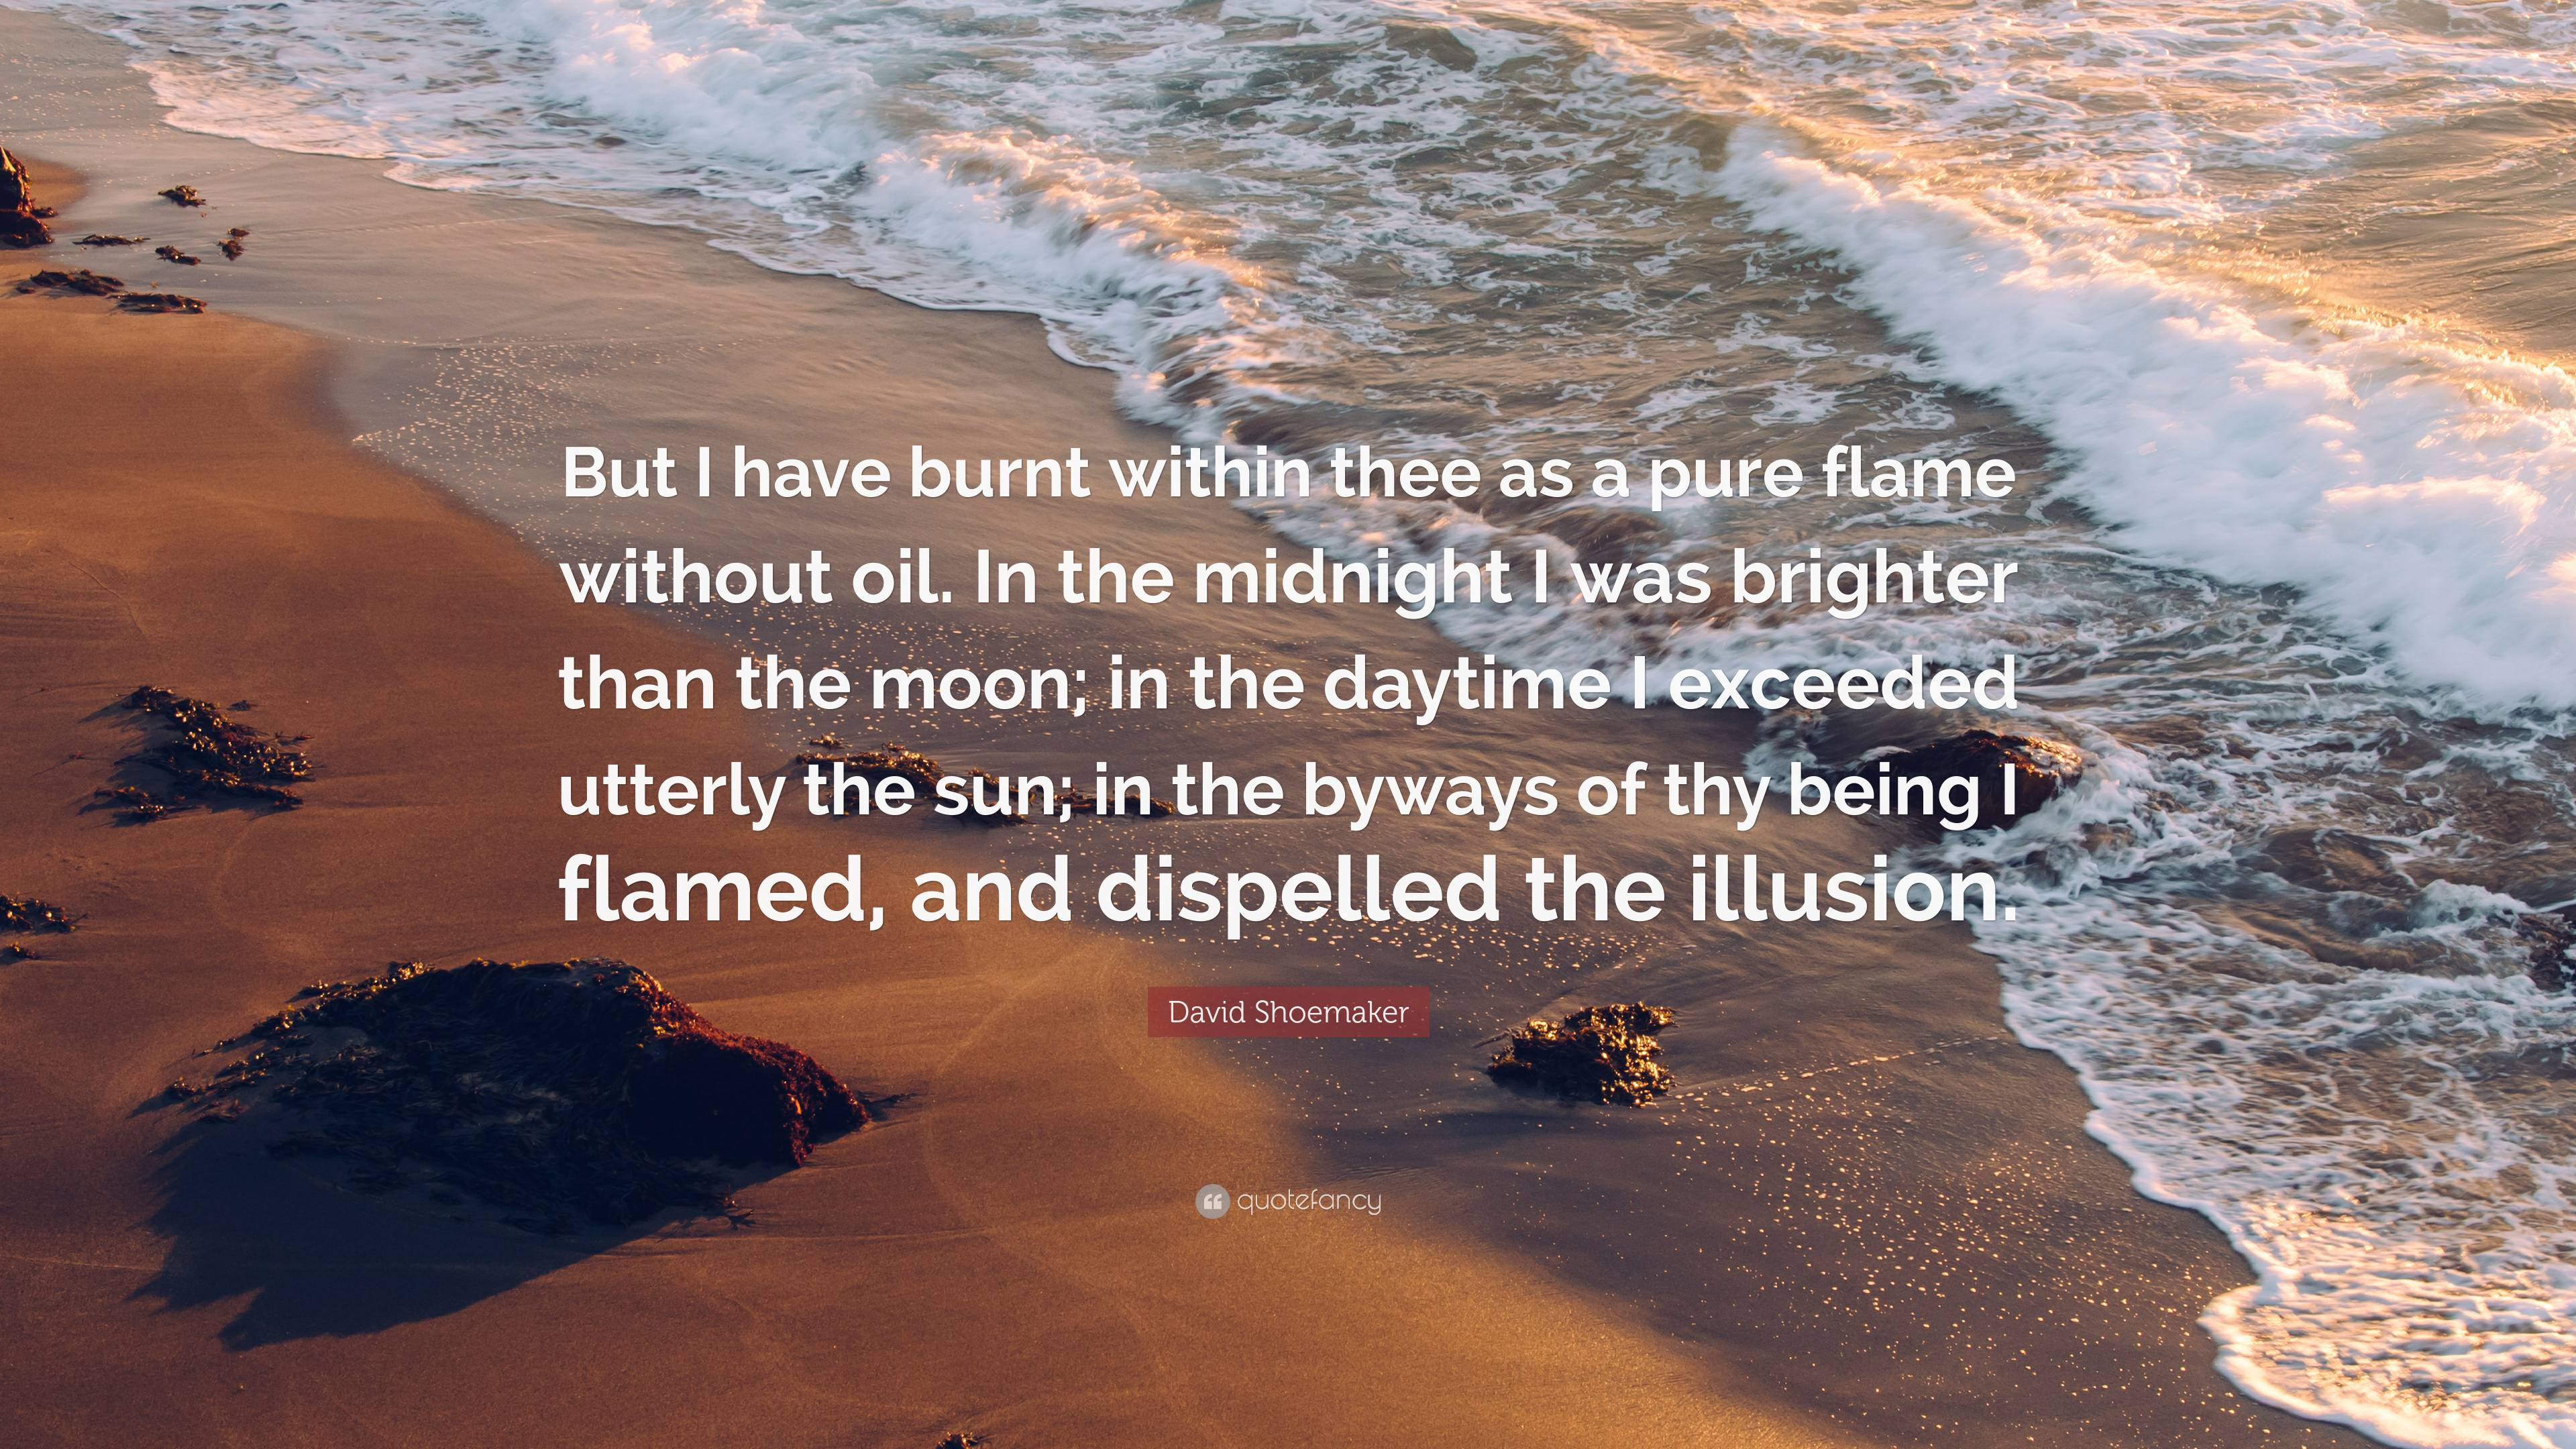 David Shoemaker Quote: “But I have burnt within thee as a pure flame ...